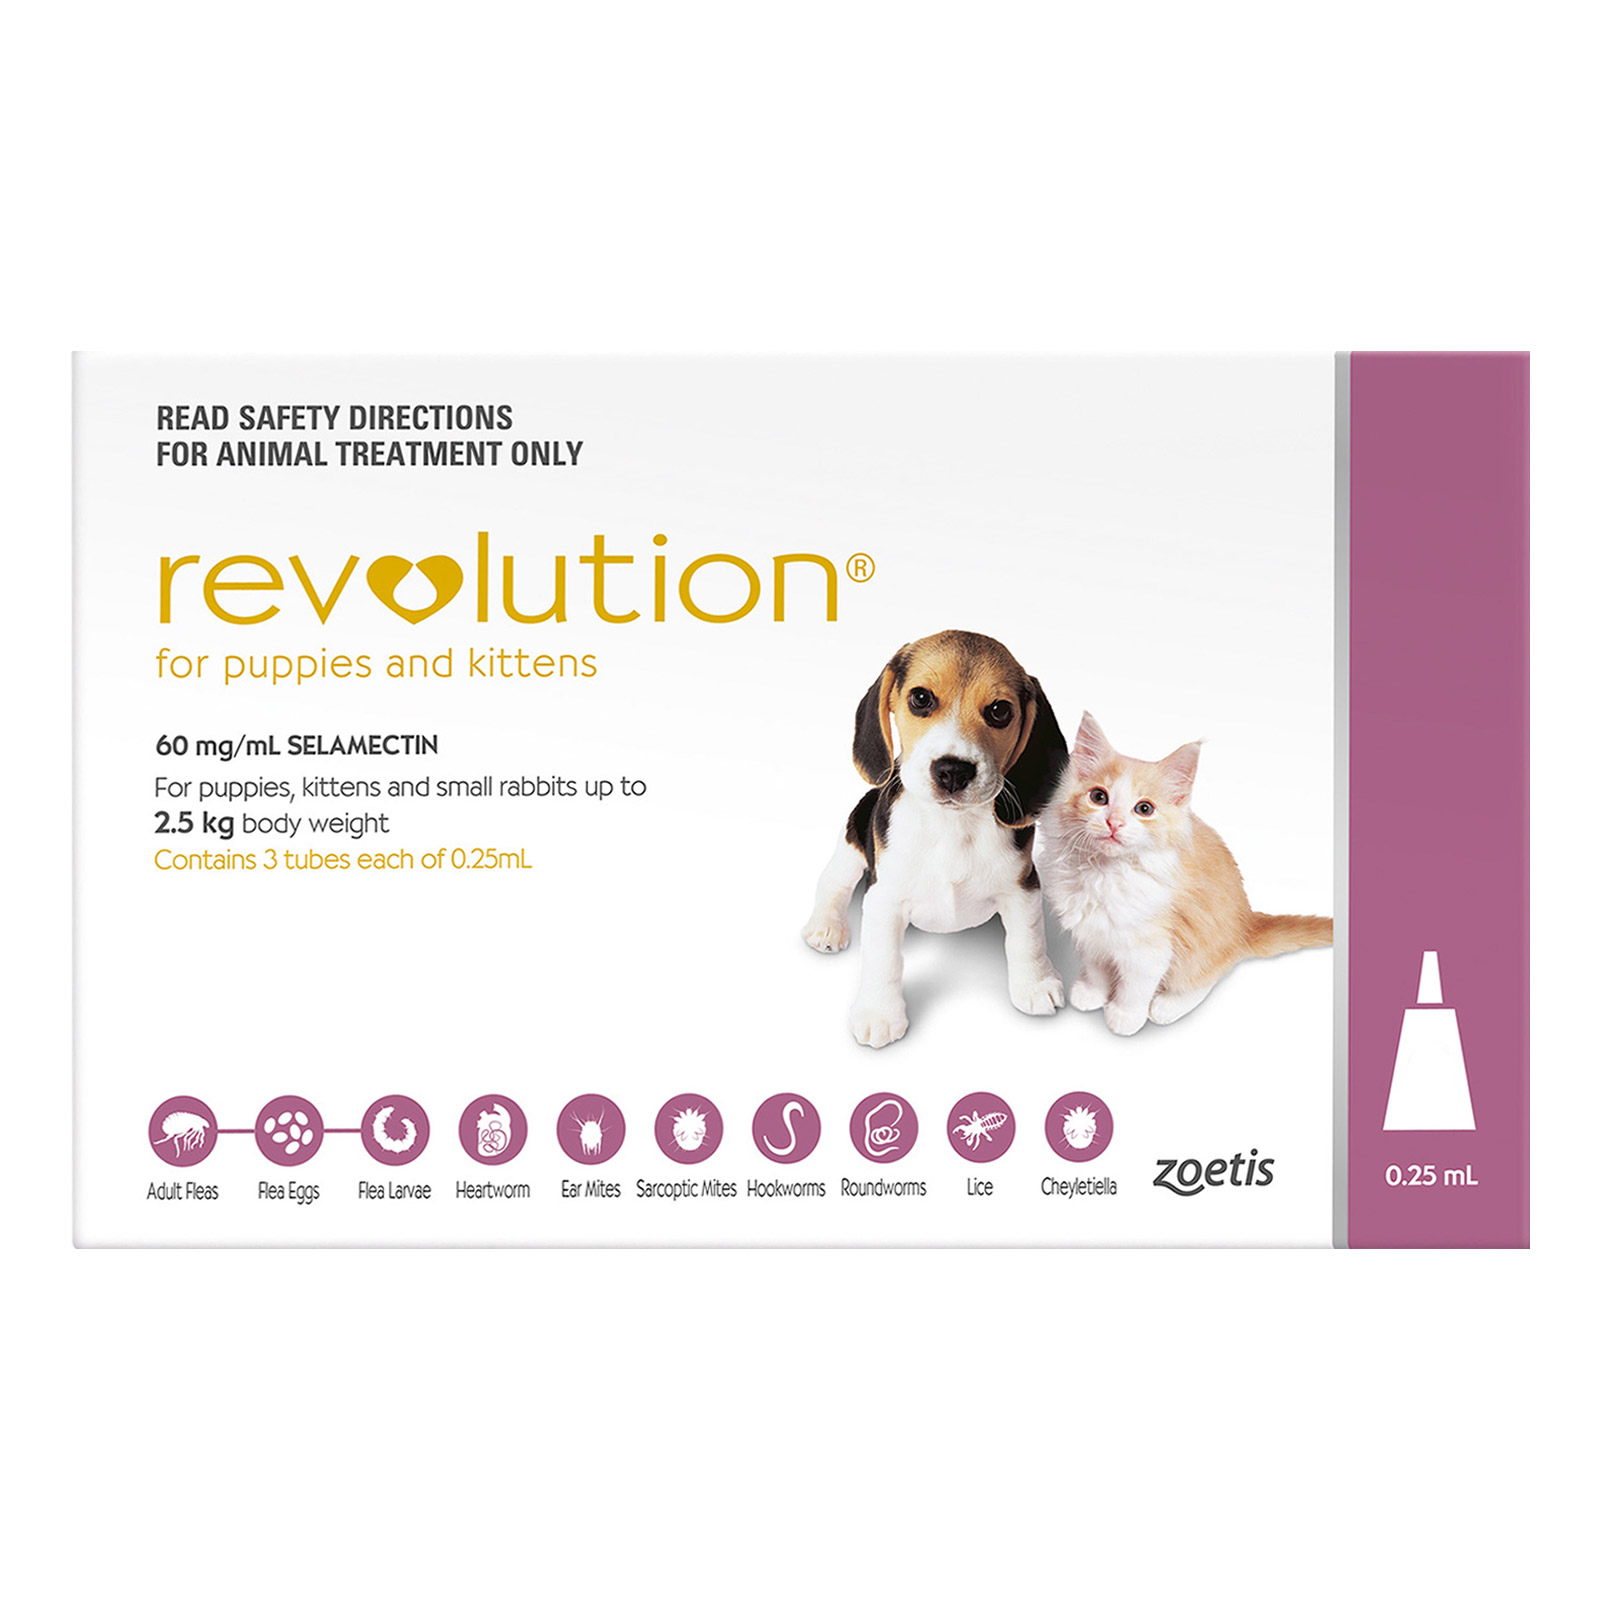 revolution-plus-for-cats-revolution-topical-solution-for-cats-5-1-15